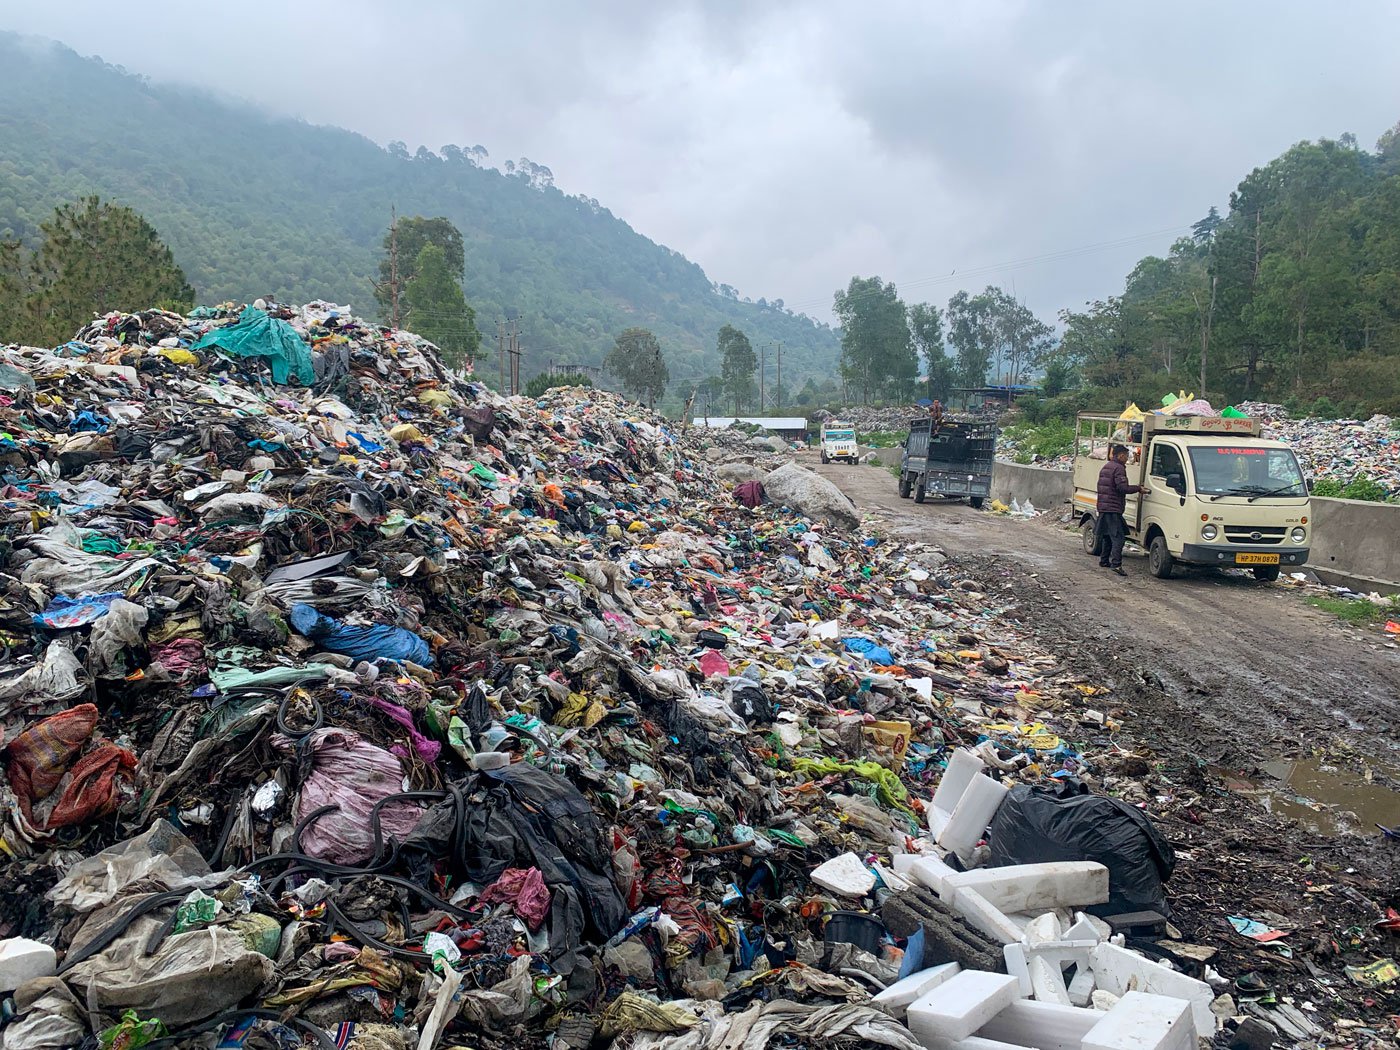 Cloth waste, kitchen waste, industrial waste, hazardous medical waste and more lie in heaps at the garbage site